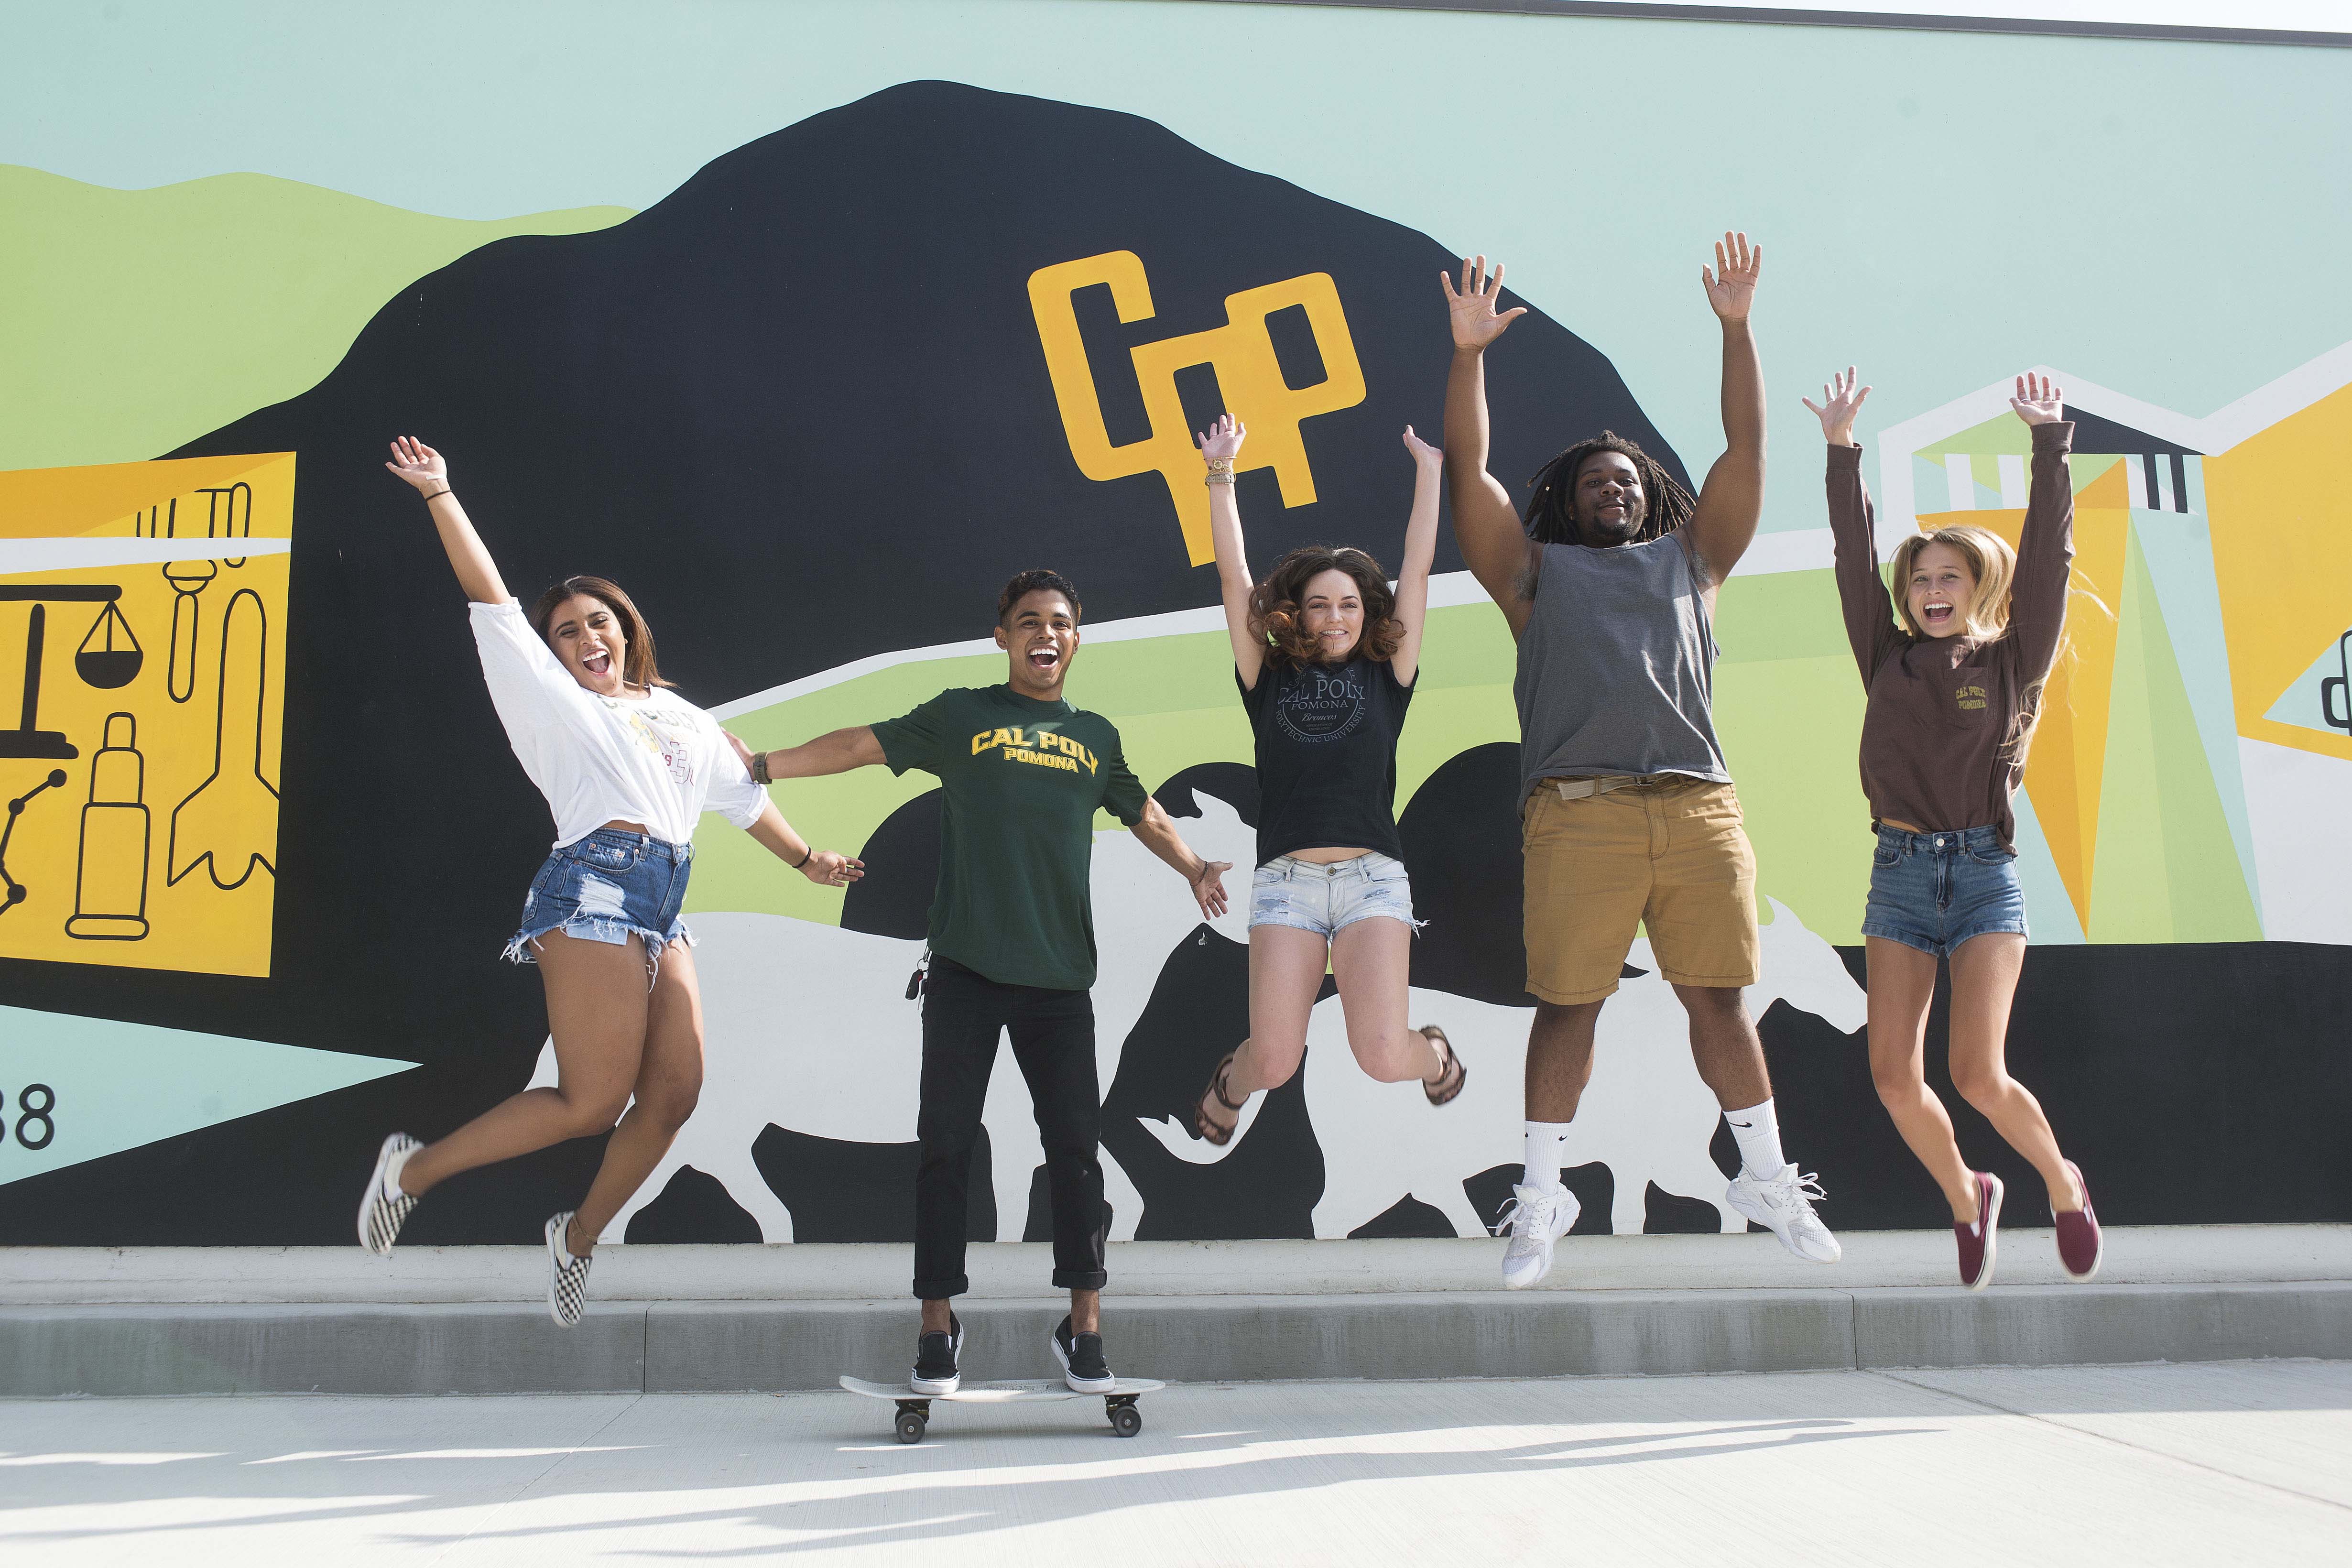 A group of 5 students jumping in front of the mural by the new parking structure